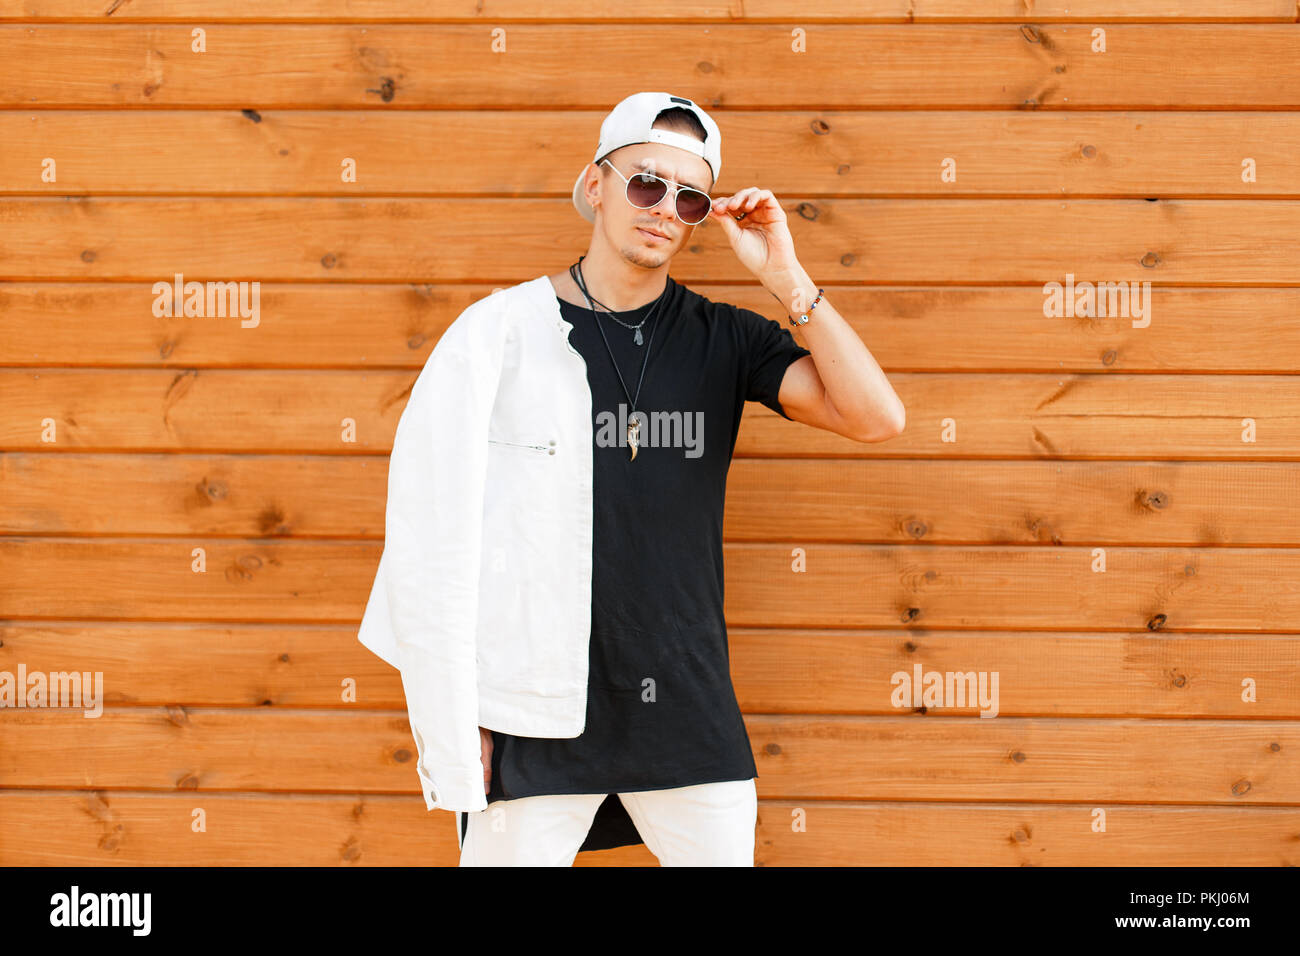 despensa Requisitos exégesis Young stylish man with sunglasses in a white jacket and a black T-shirt  with a baseball cap near the wooden wall Stock Photo - Alamy